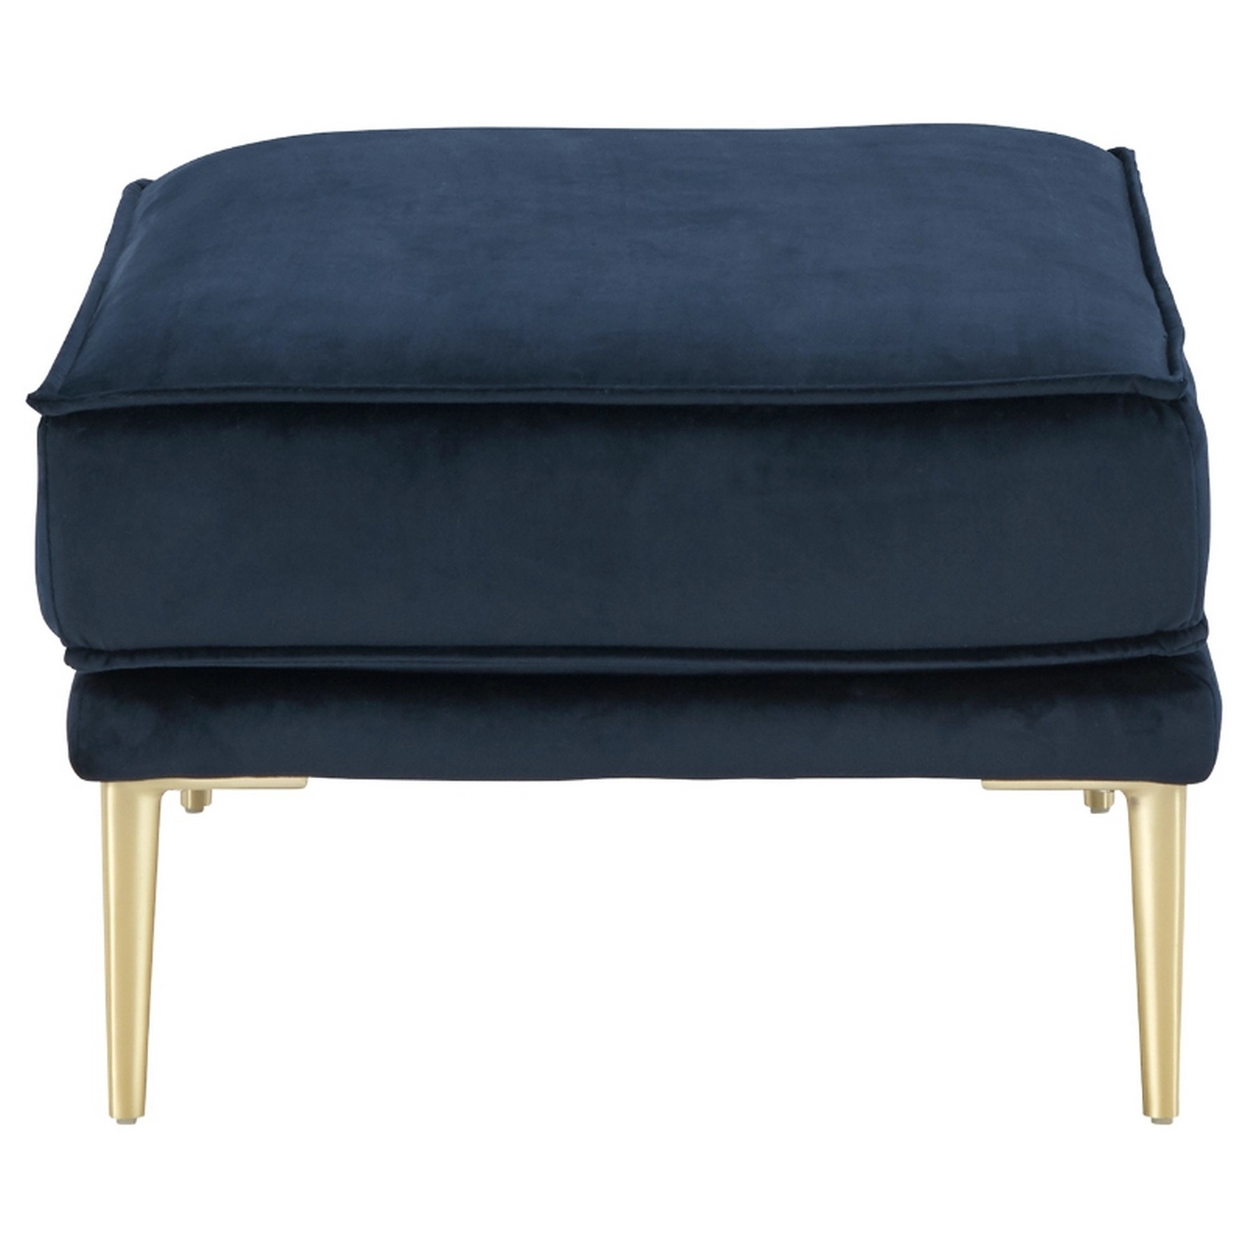 Ottoman With Cushioned Top And Metal Legs, Blue And Brass- Saltoro Sherpi